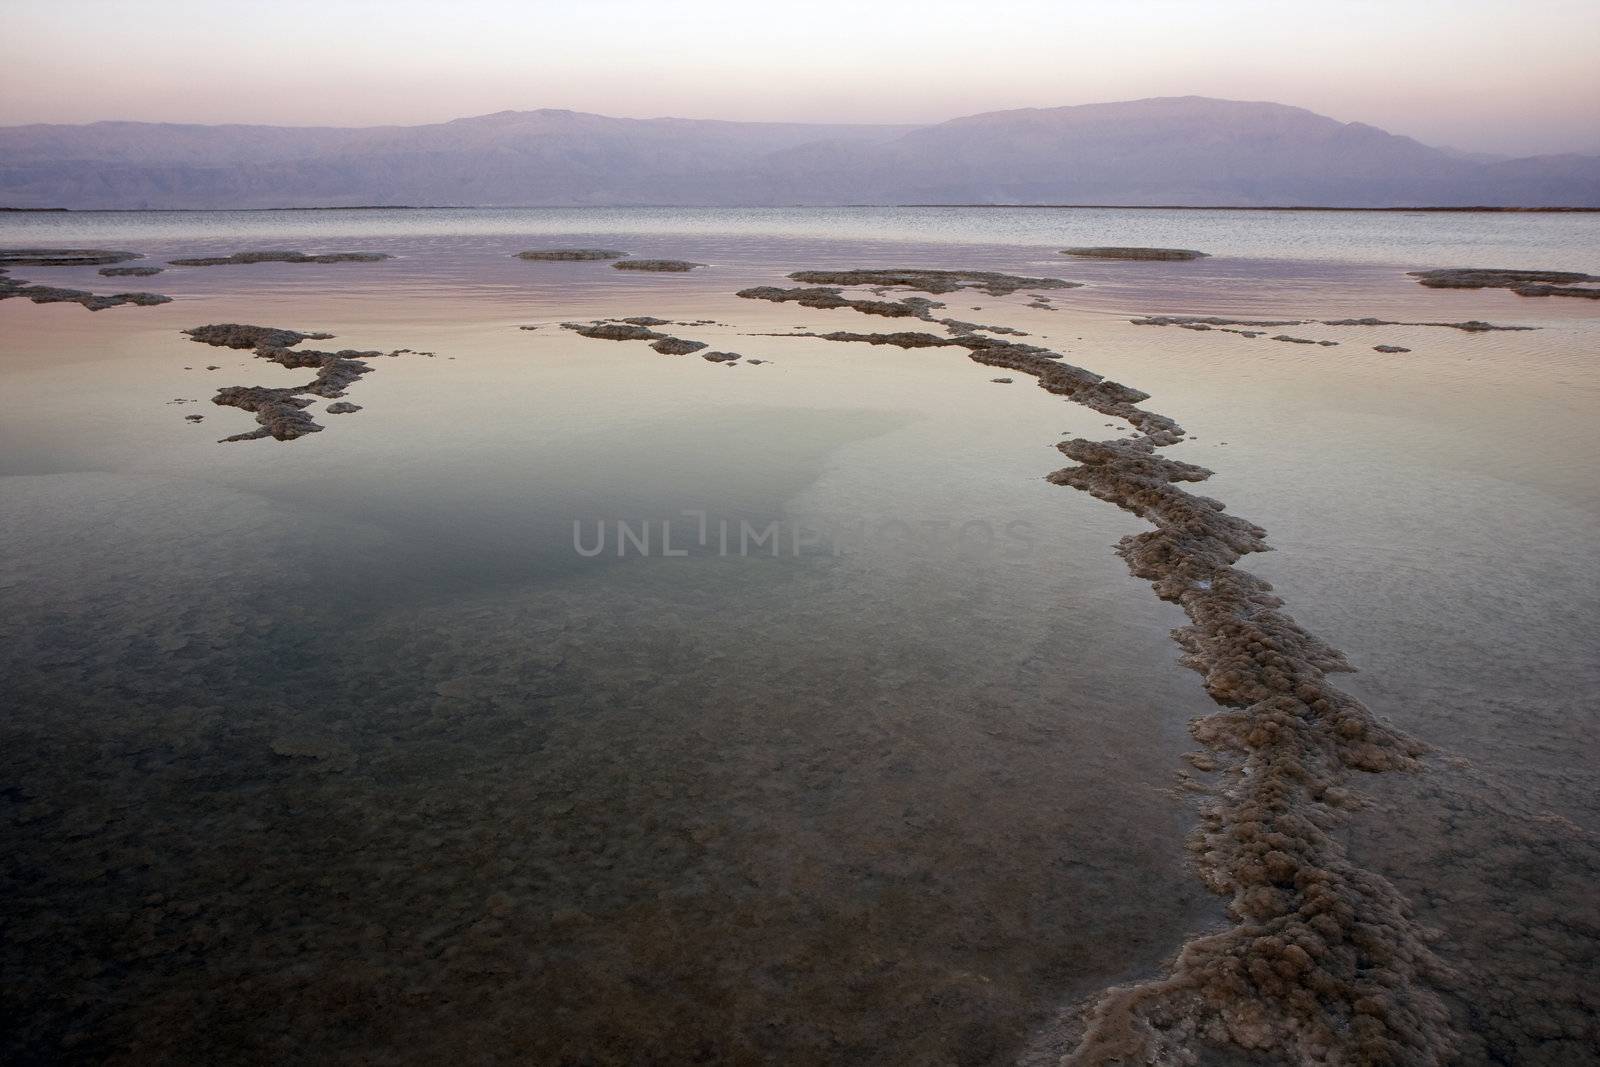 The water of the dead sea with the Jordan mountains at sunset